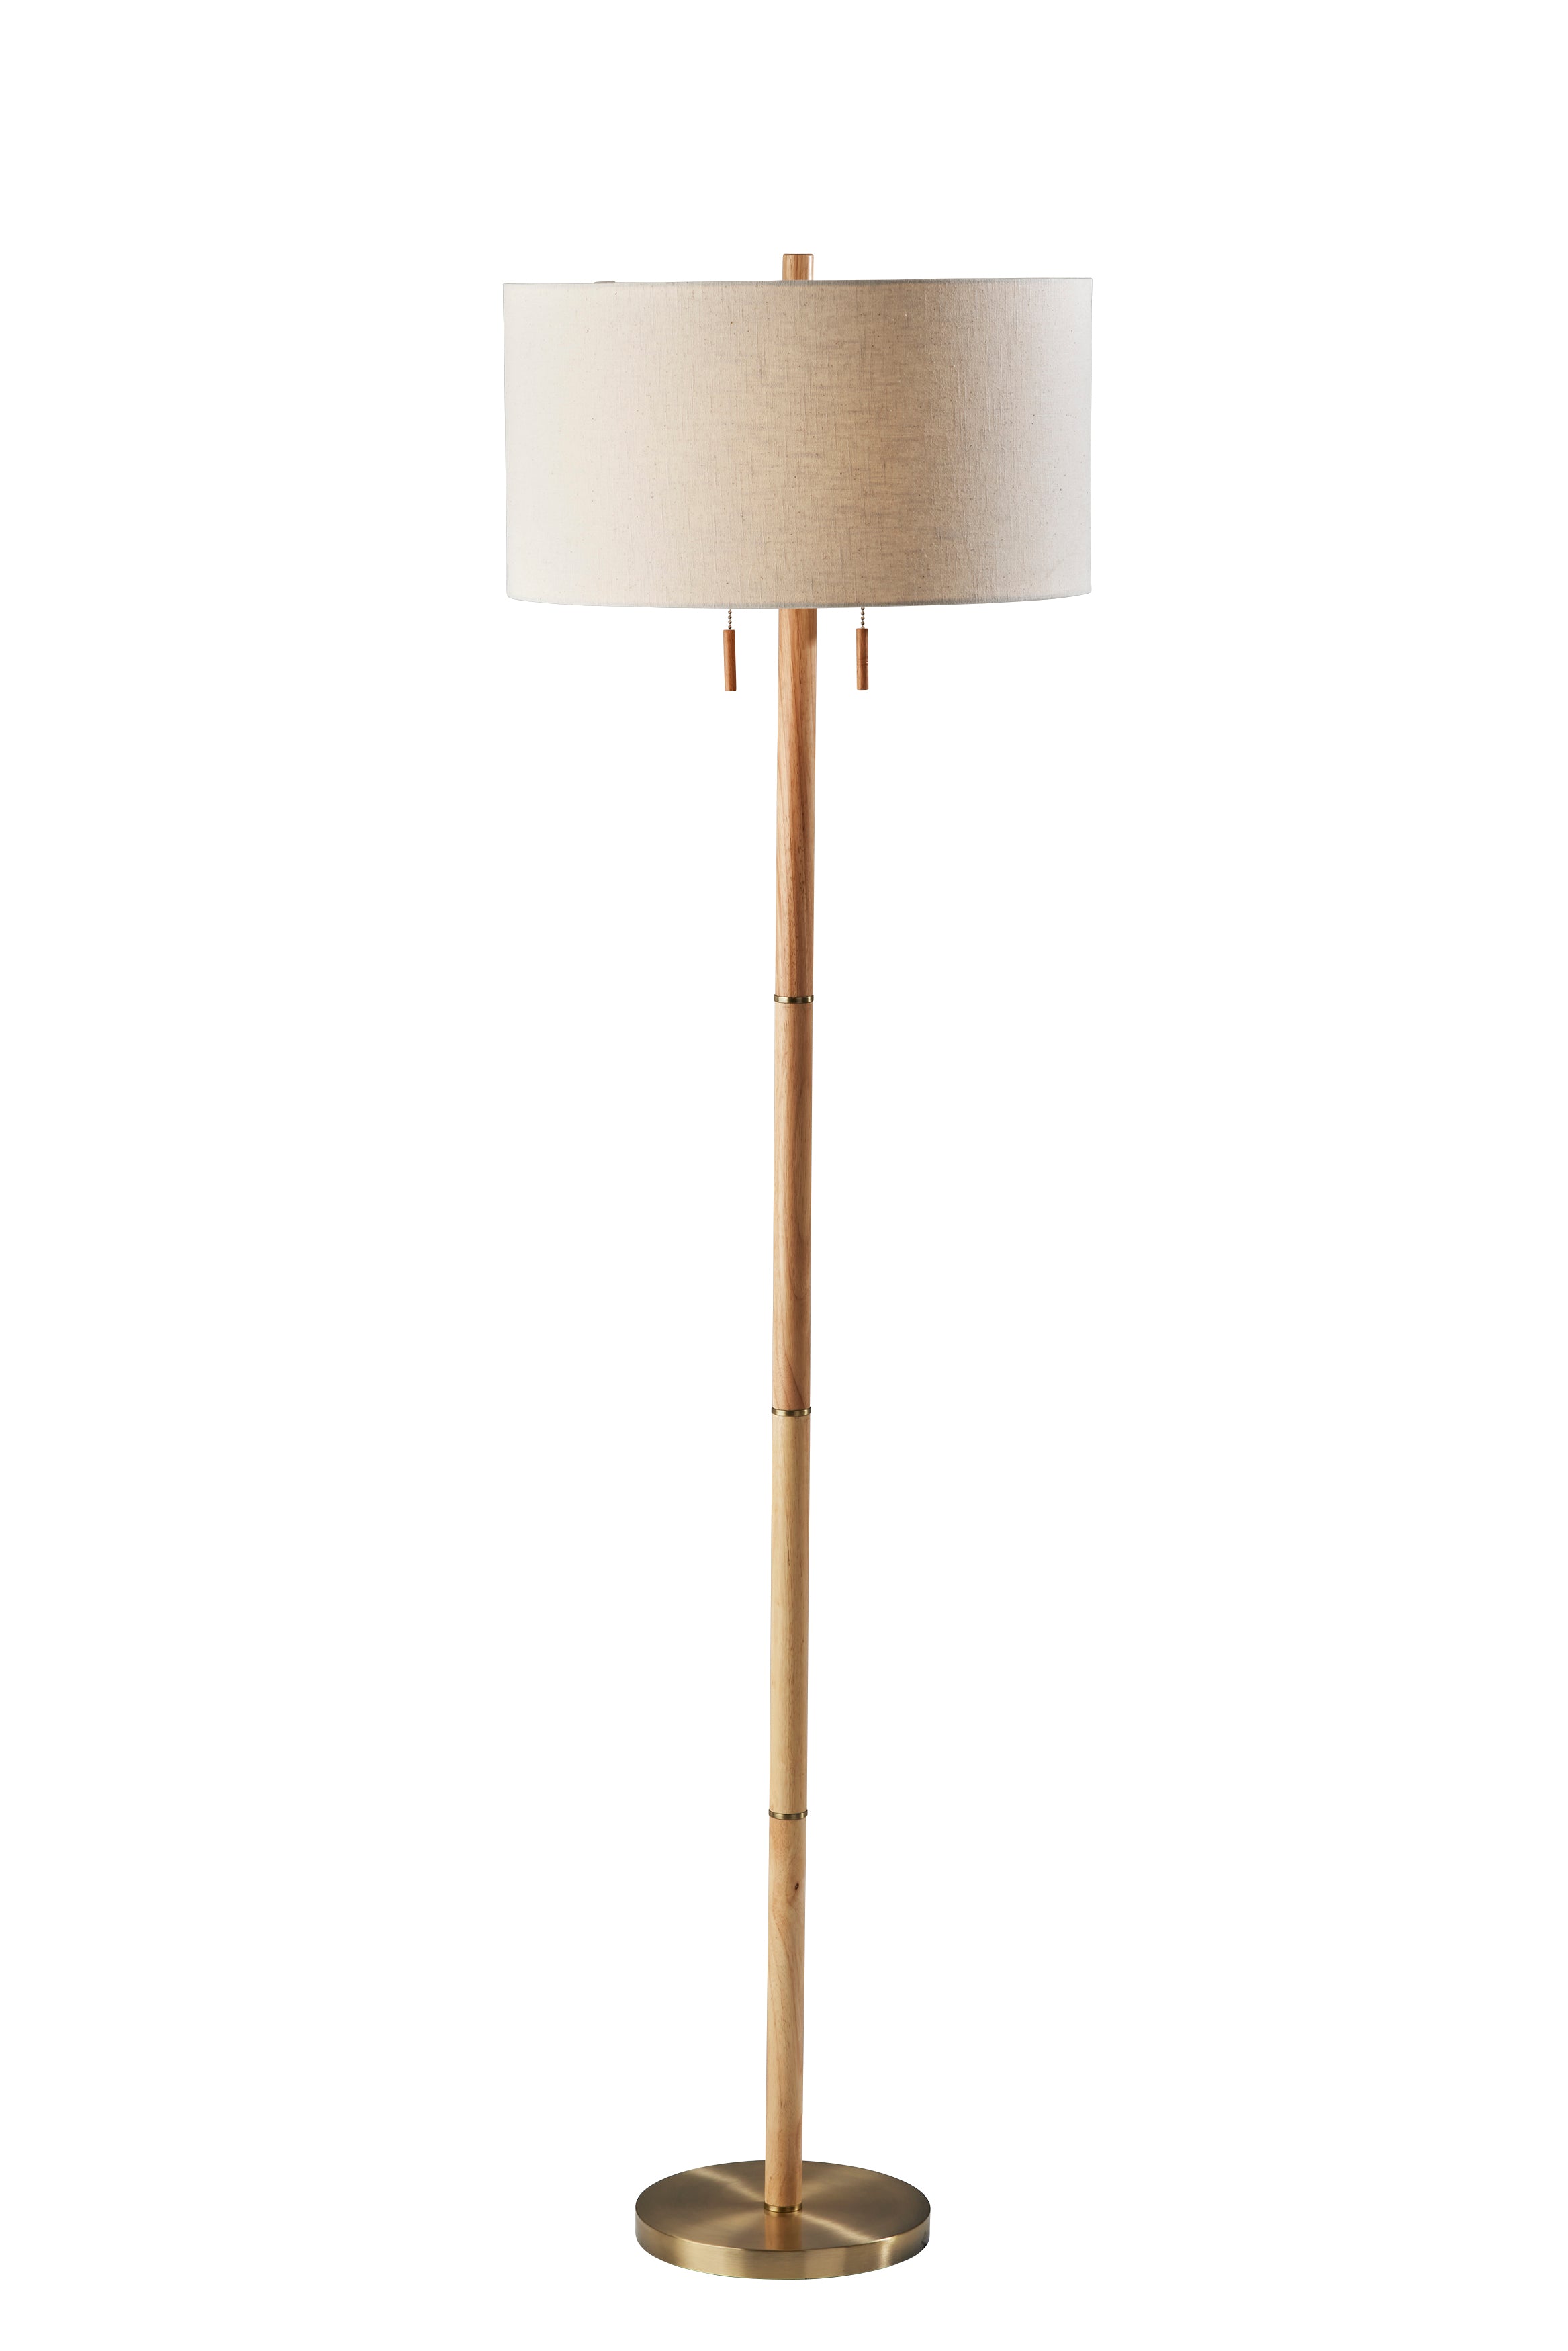 MADELINE Floor lamp Wood, Gold - 3375-12 | ADESSO